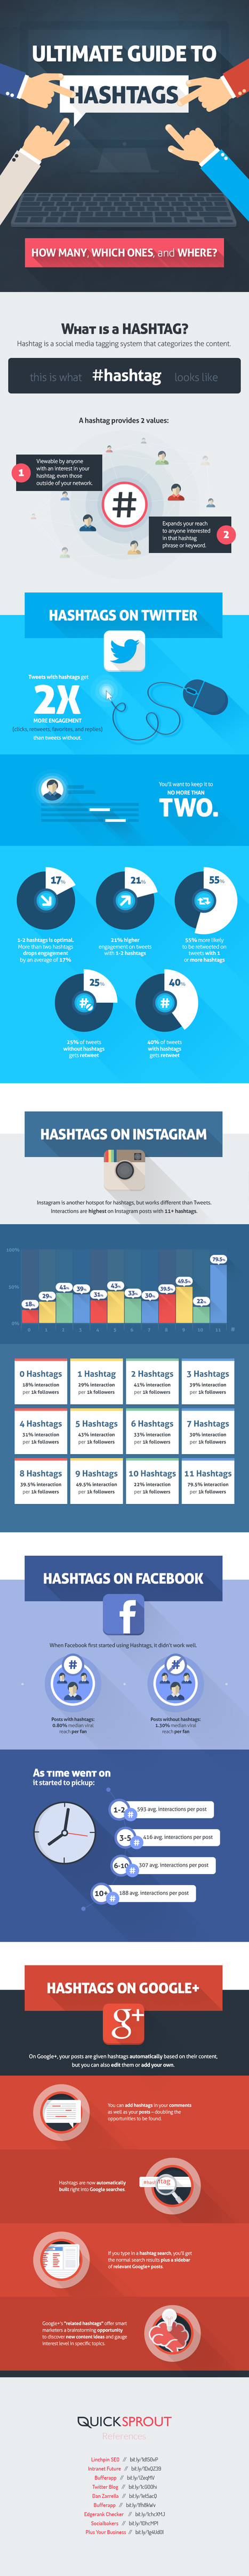 Ultimate Guide to Hashtags [Infographic] - B2B Infographics | The MarTech Digest | Scoop.it